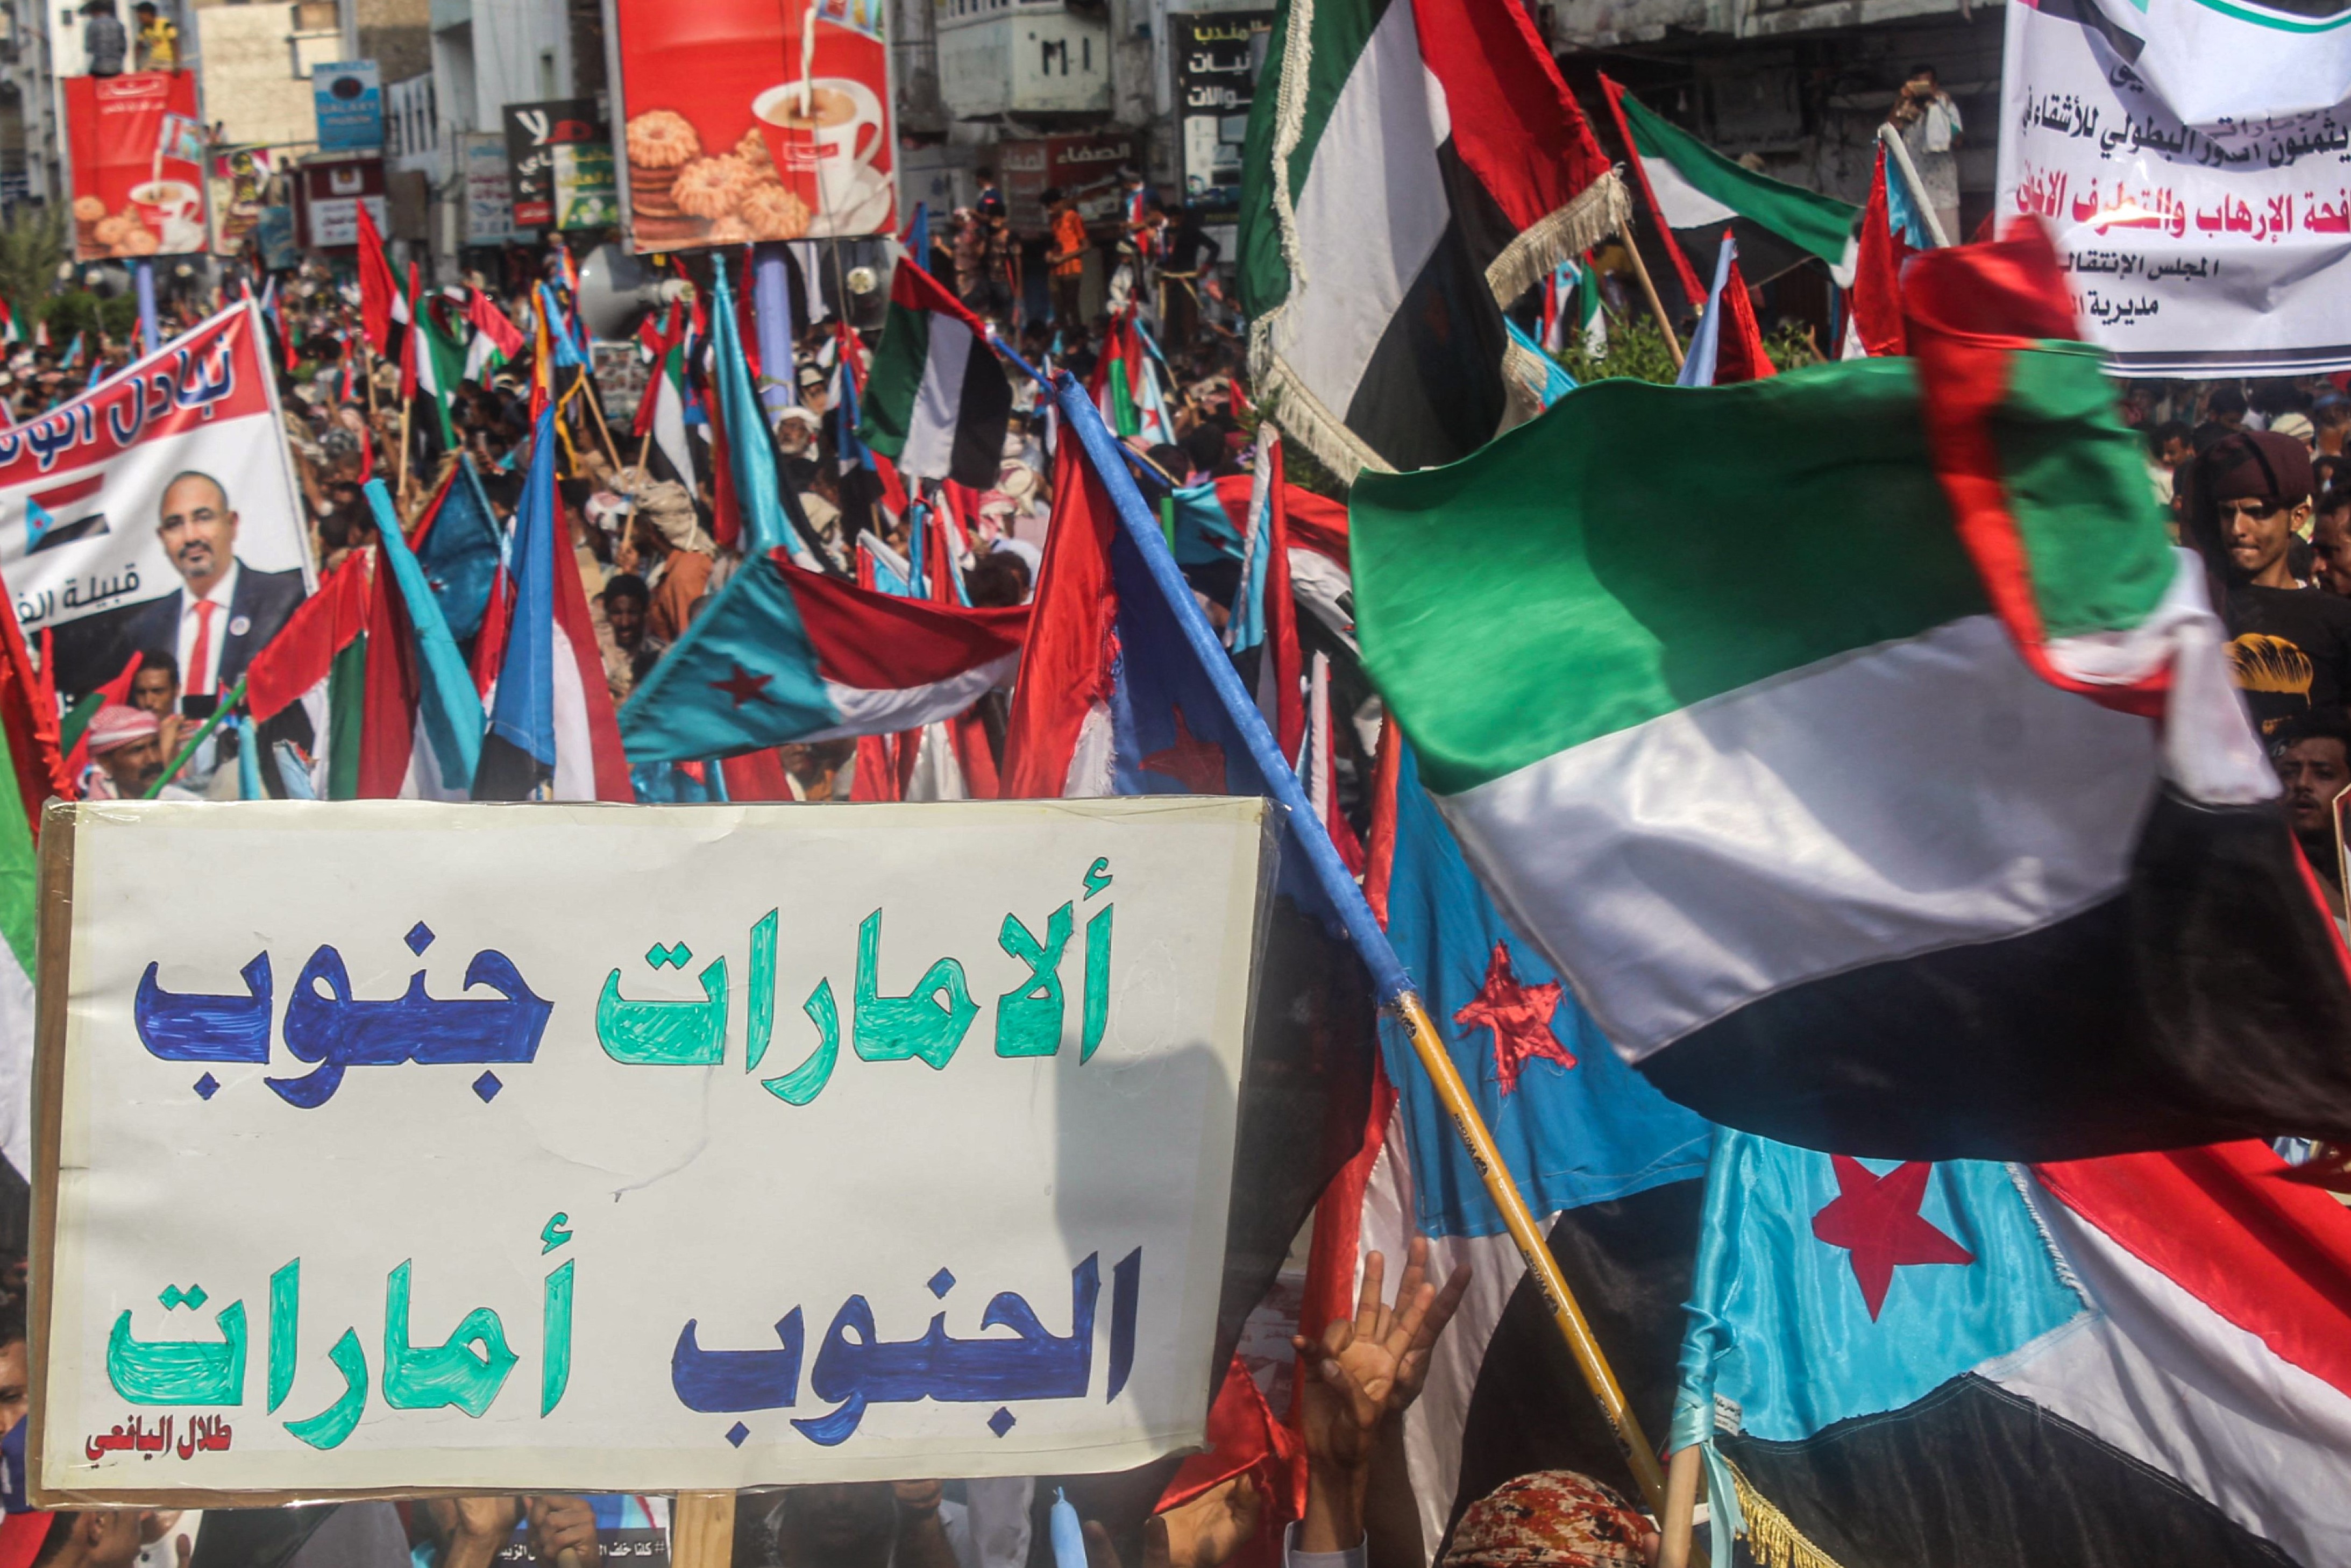 People march with a sign reading in Arabic "UAE South, South UAE" with the flags of south Yemen and the United Arab Emirates (UAE) during a demonstration titled the "million-man march of gratitude for Saudi Arabia and the UAE", in the centre of the second city of Aden on September 5, 2019.